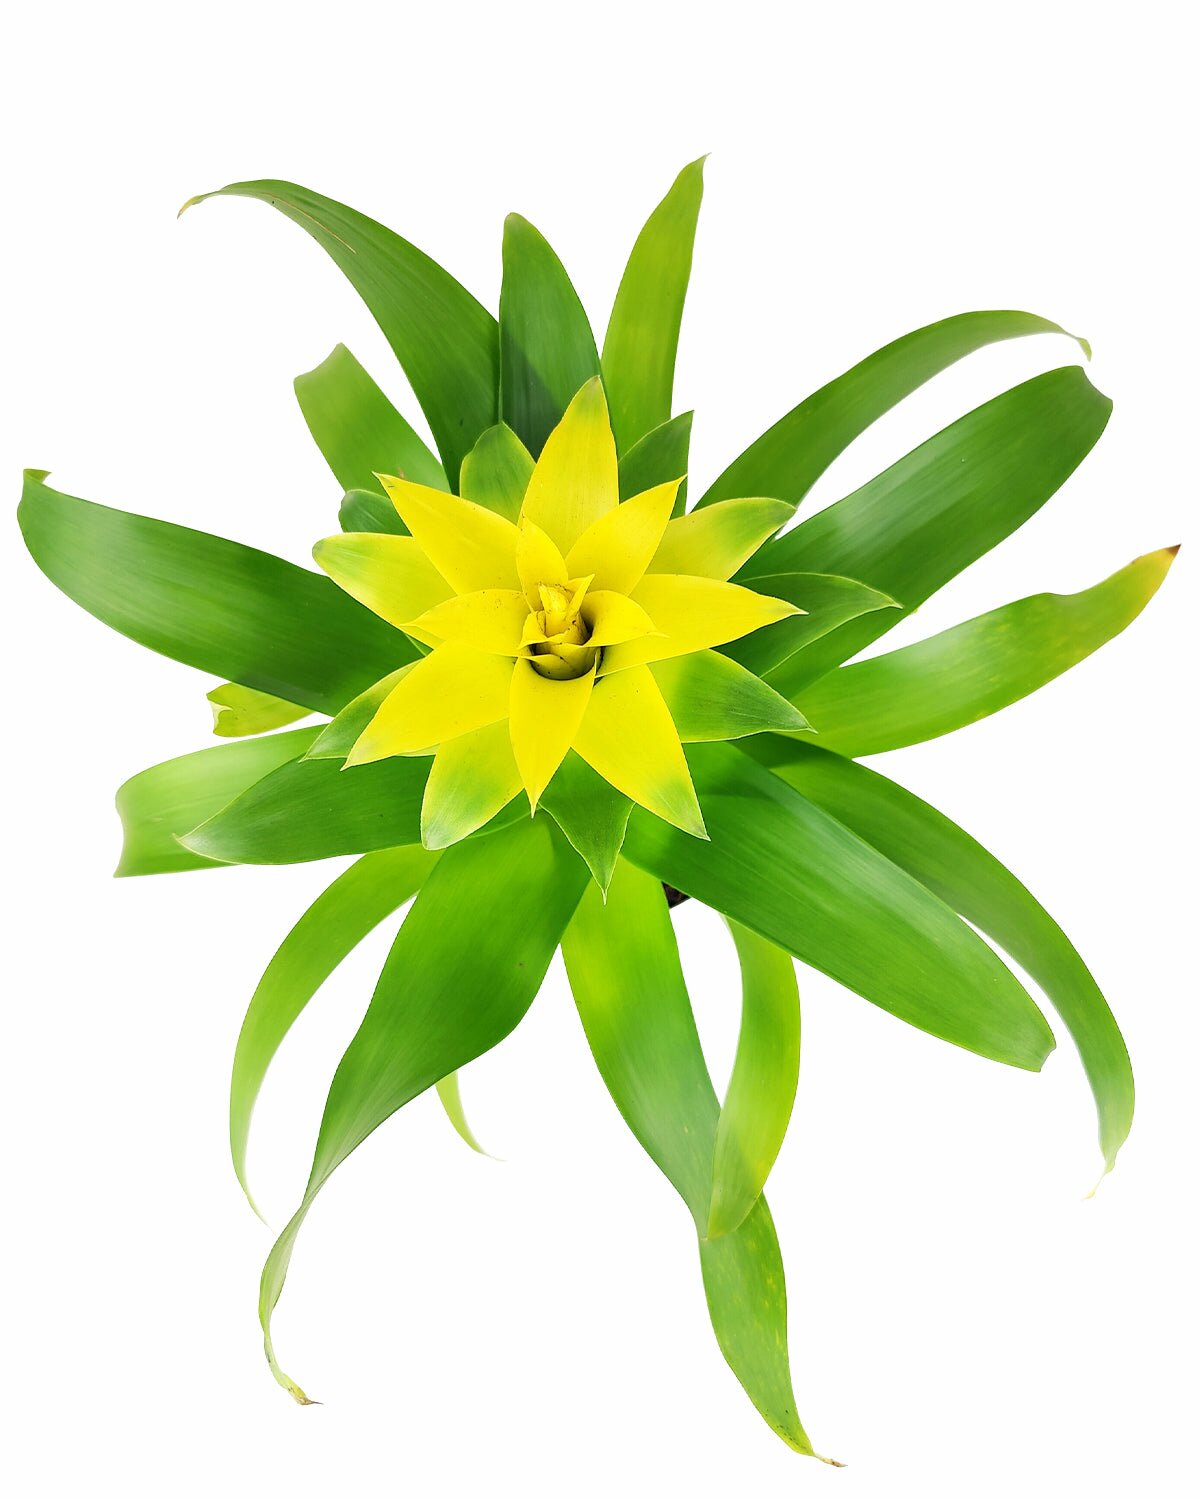 Guzmania hybrid yellow plant, Guzmania Bromeliad, colorful houseplant, flowering plant for home office, low maintenance houseplant, easy to care plant for beginners